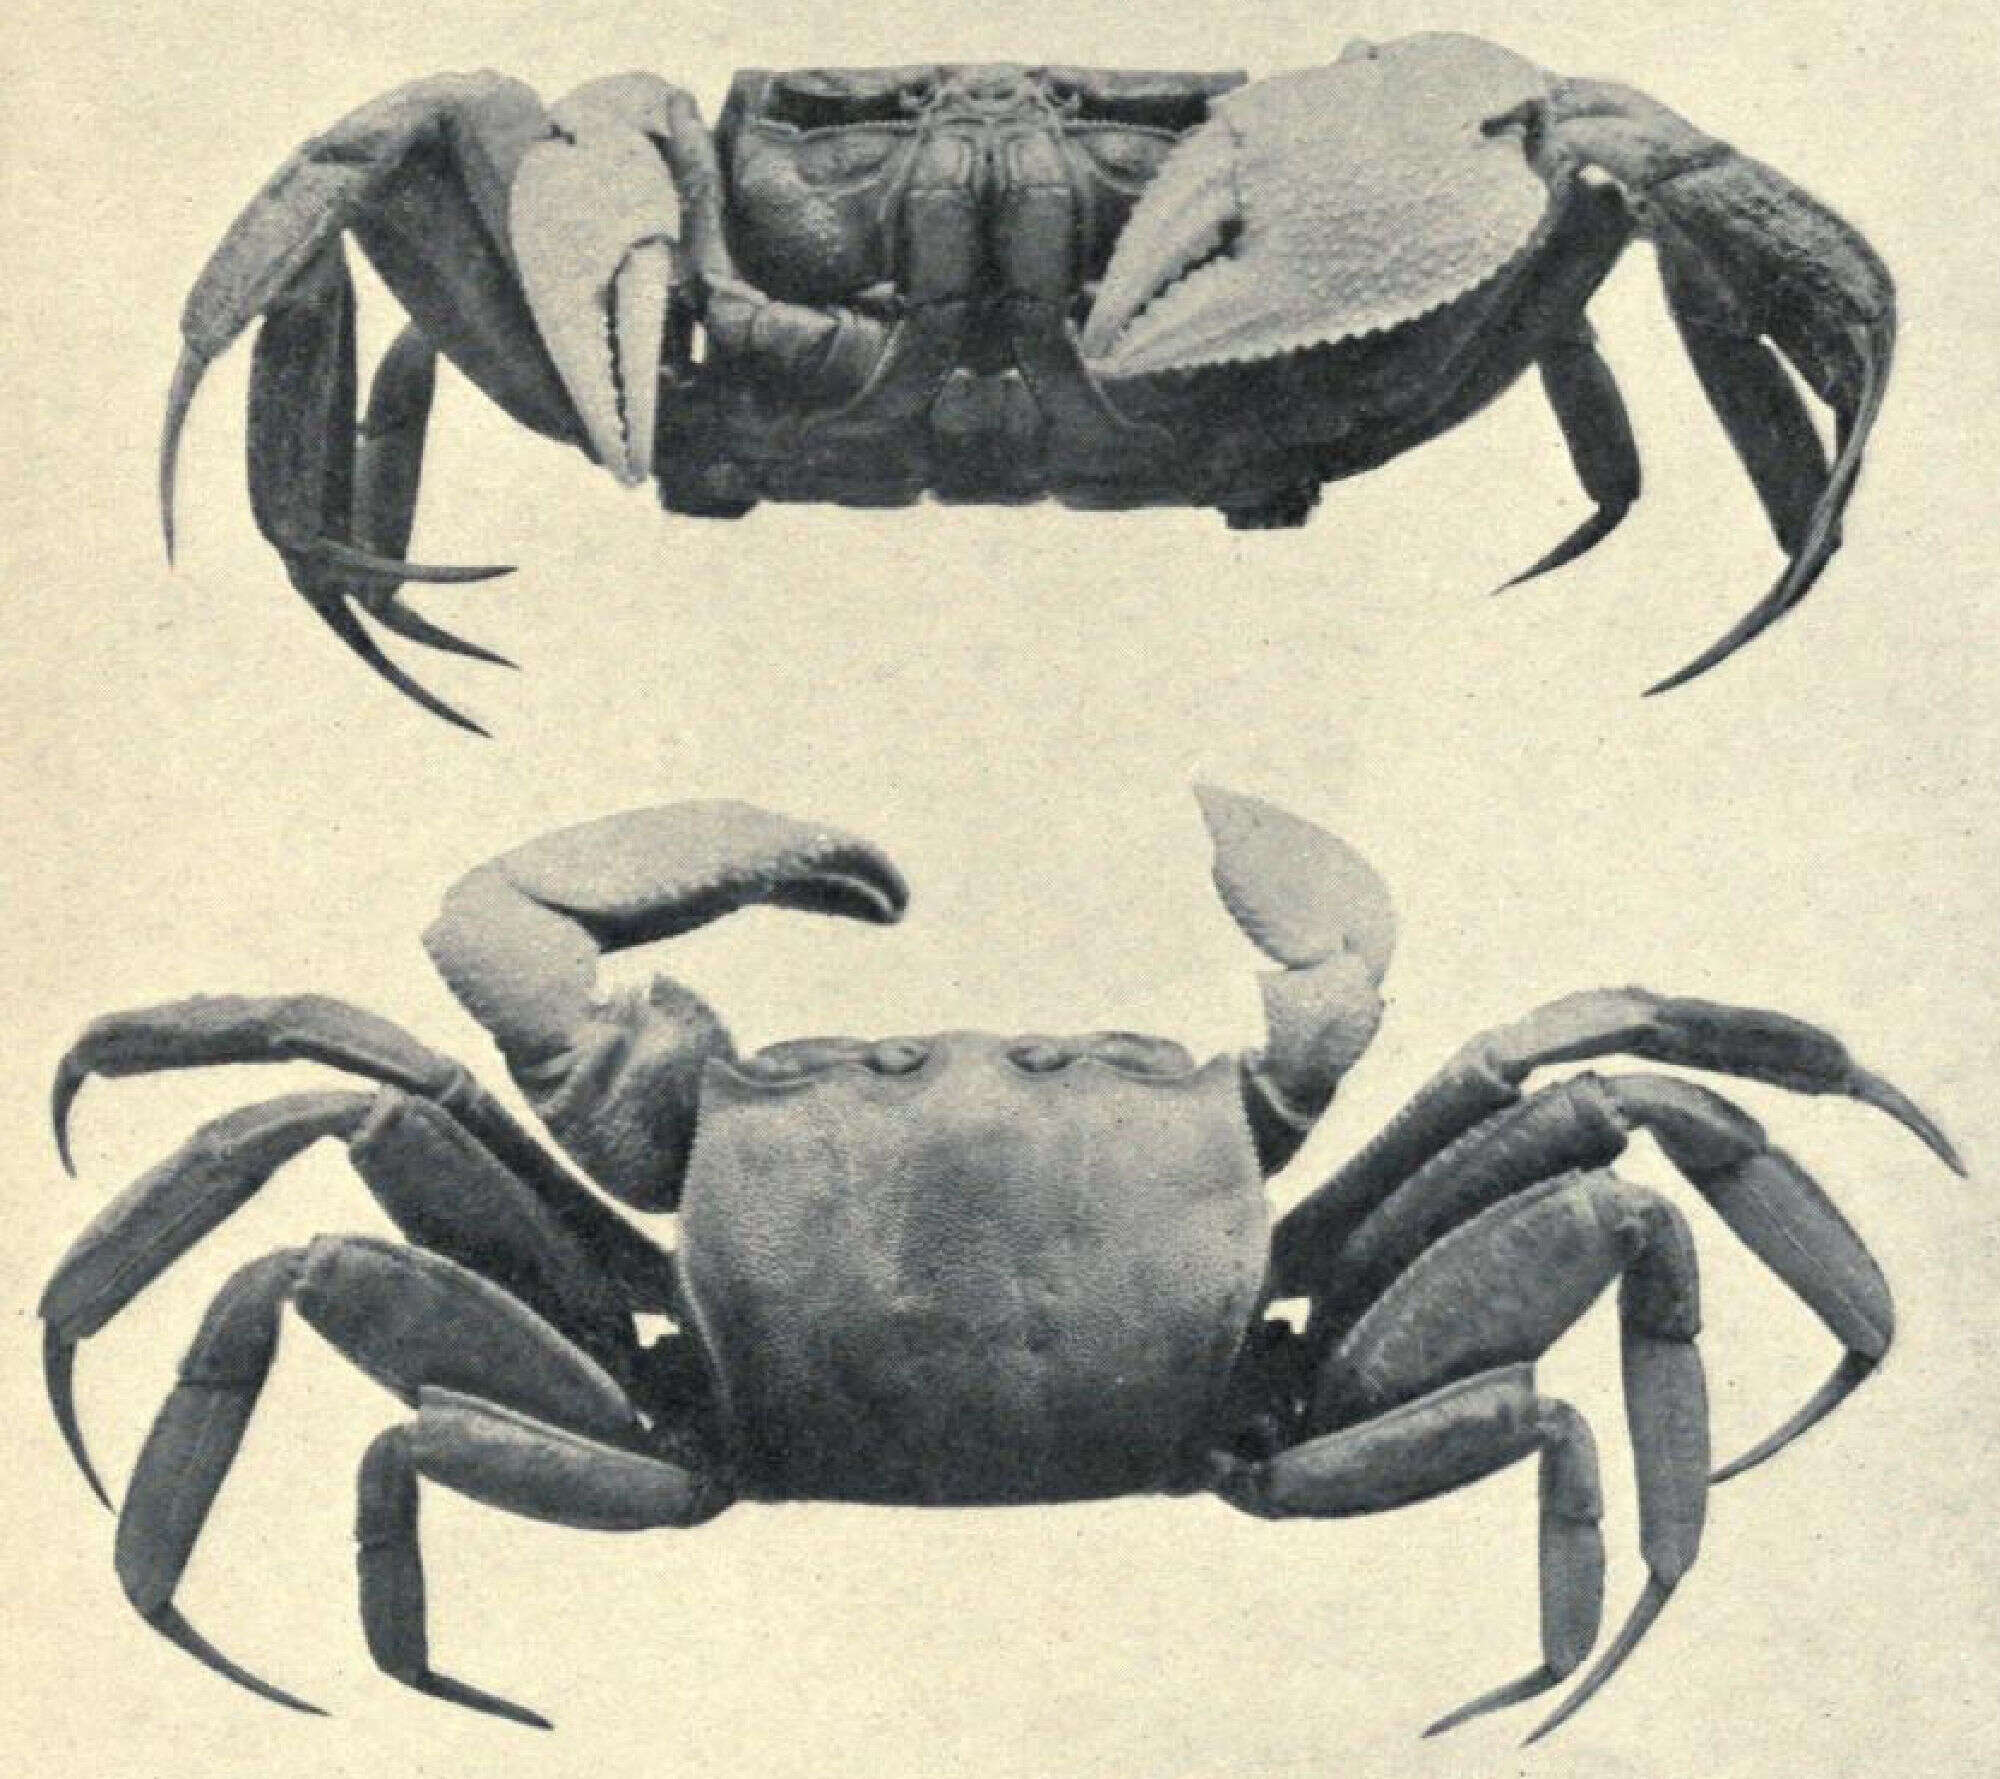 Image of Gulf ghost crab